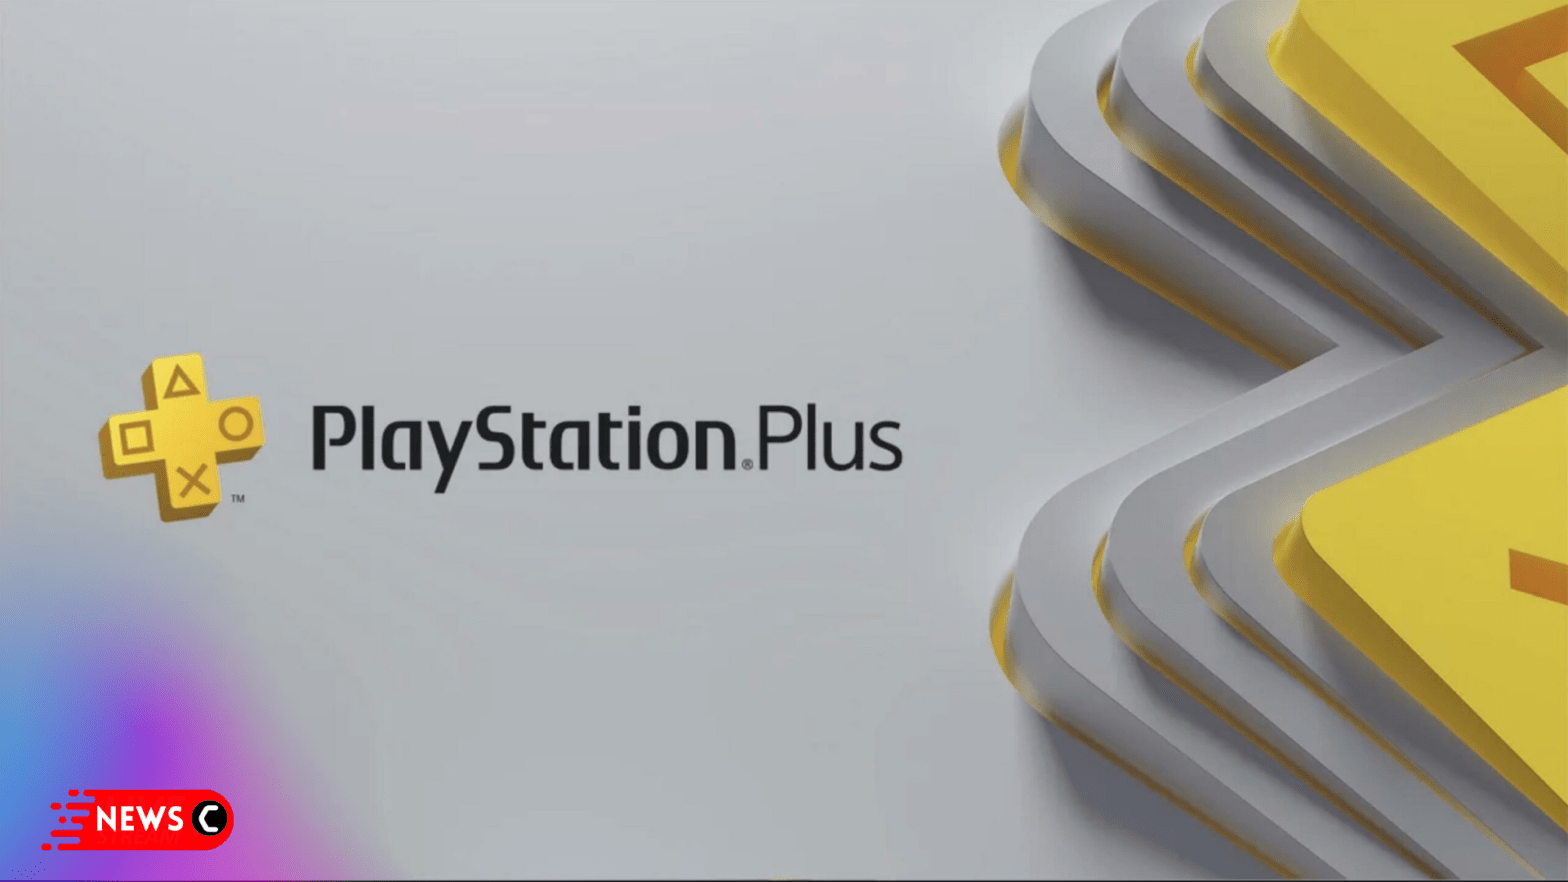 Extra Storage Space is Required for the PS Plus Extra and Premium Games